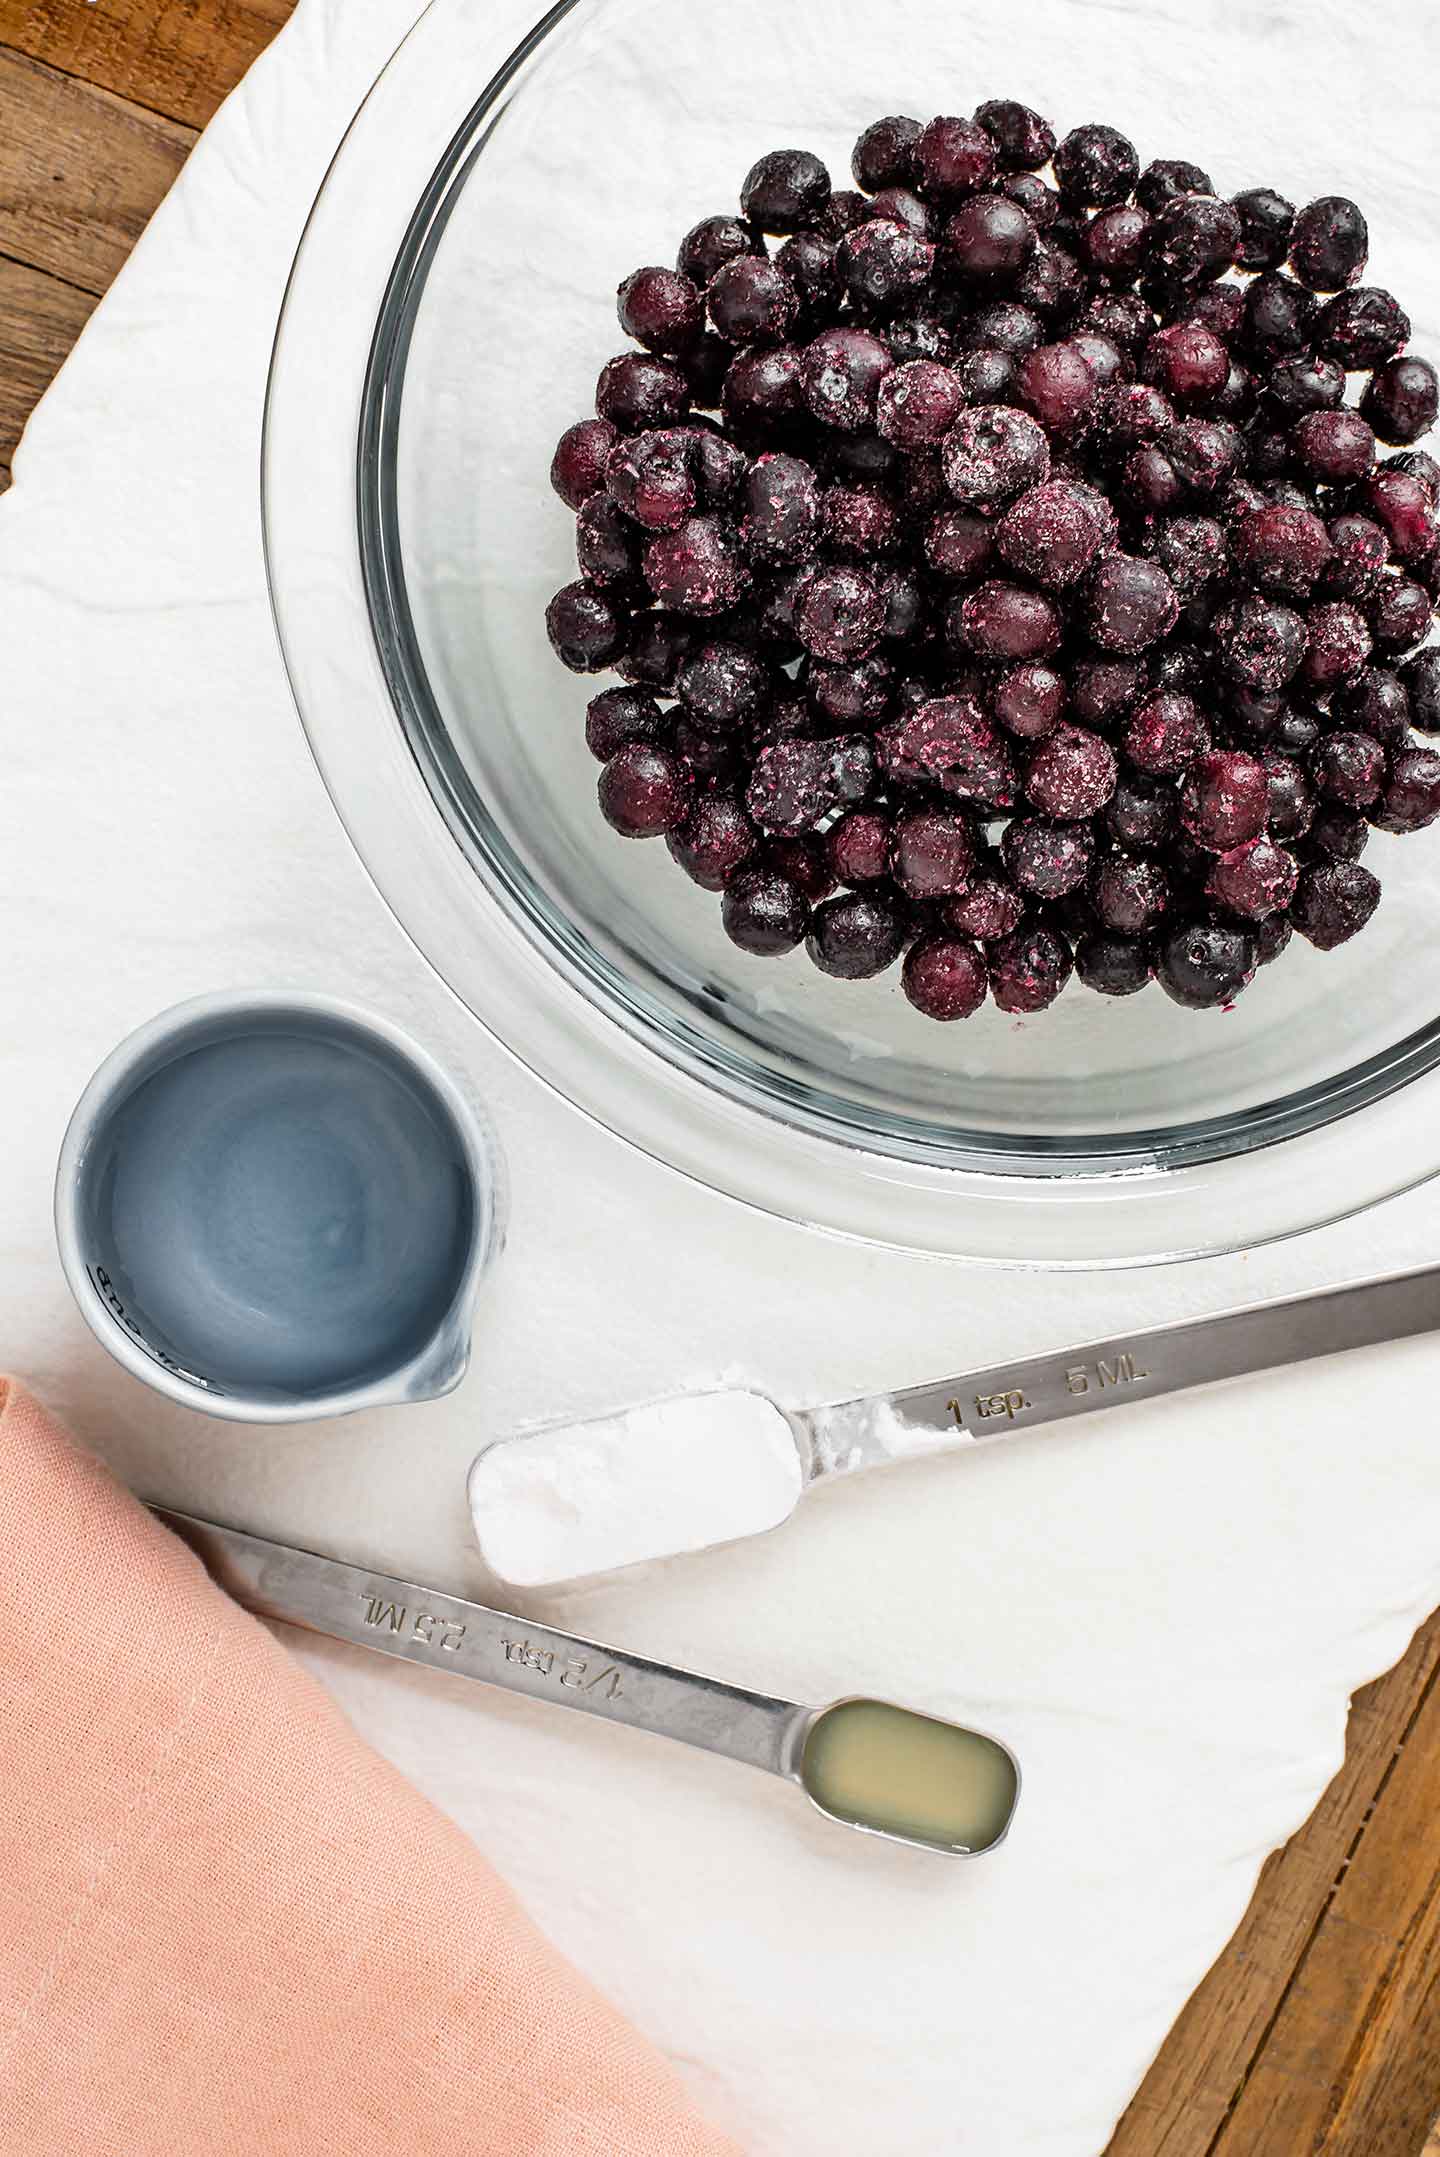 Top down view of frozen blueberries in a glass bowl on a white tray. A measuring spoon of starch and a small dish of water sit next to the berries.